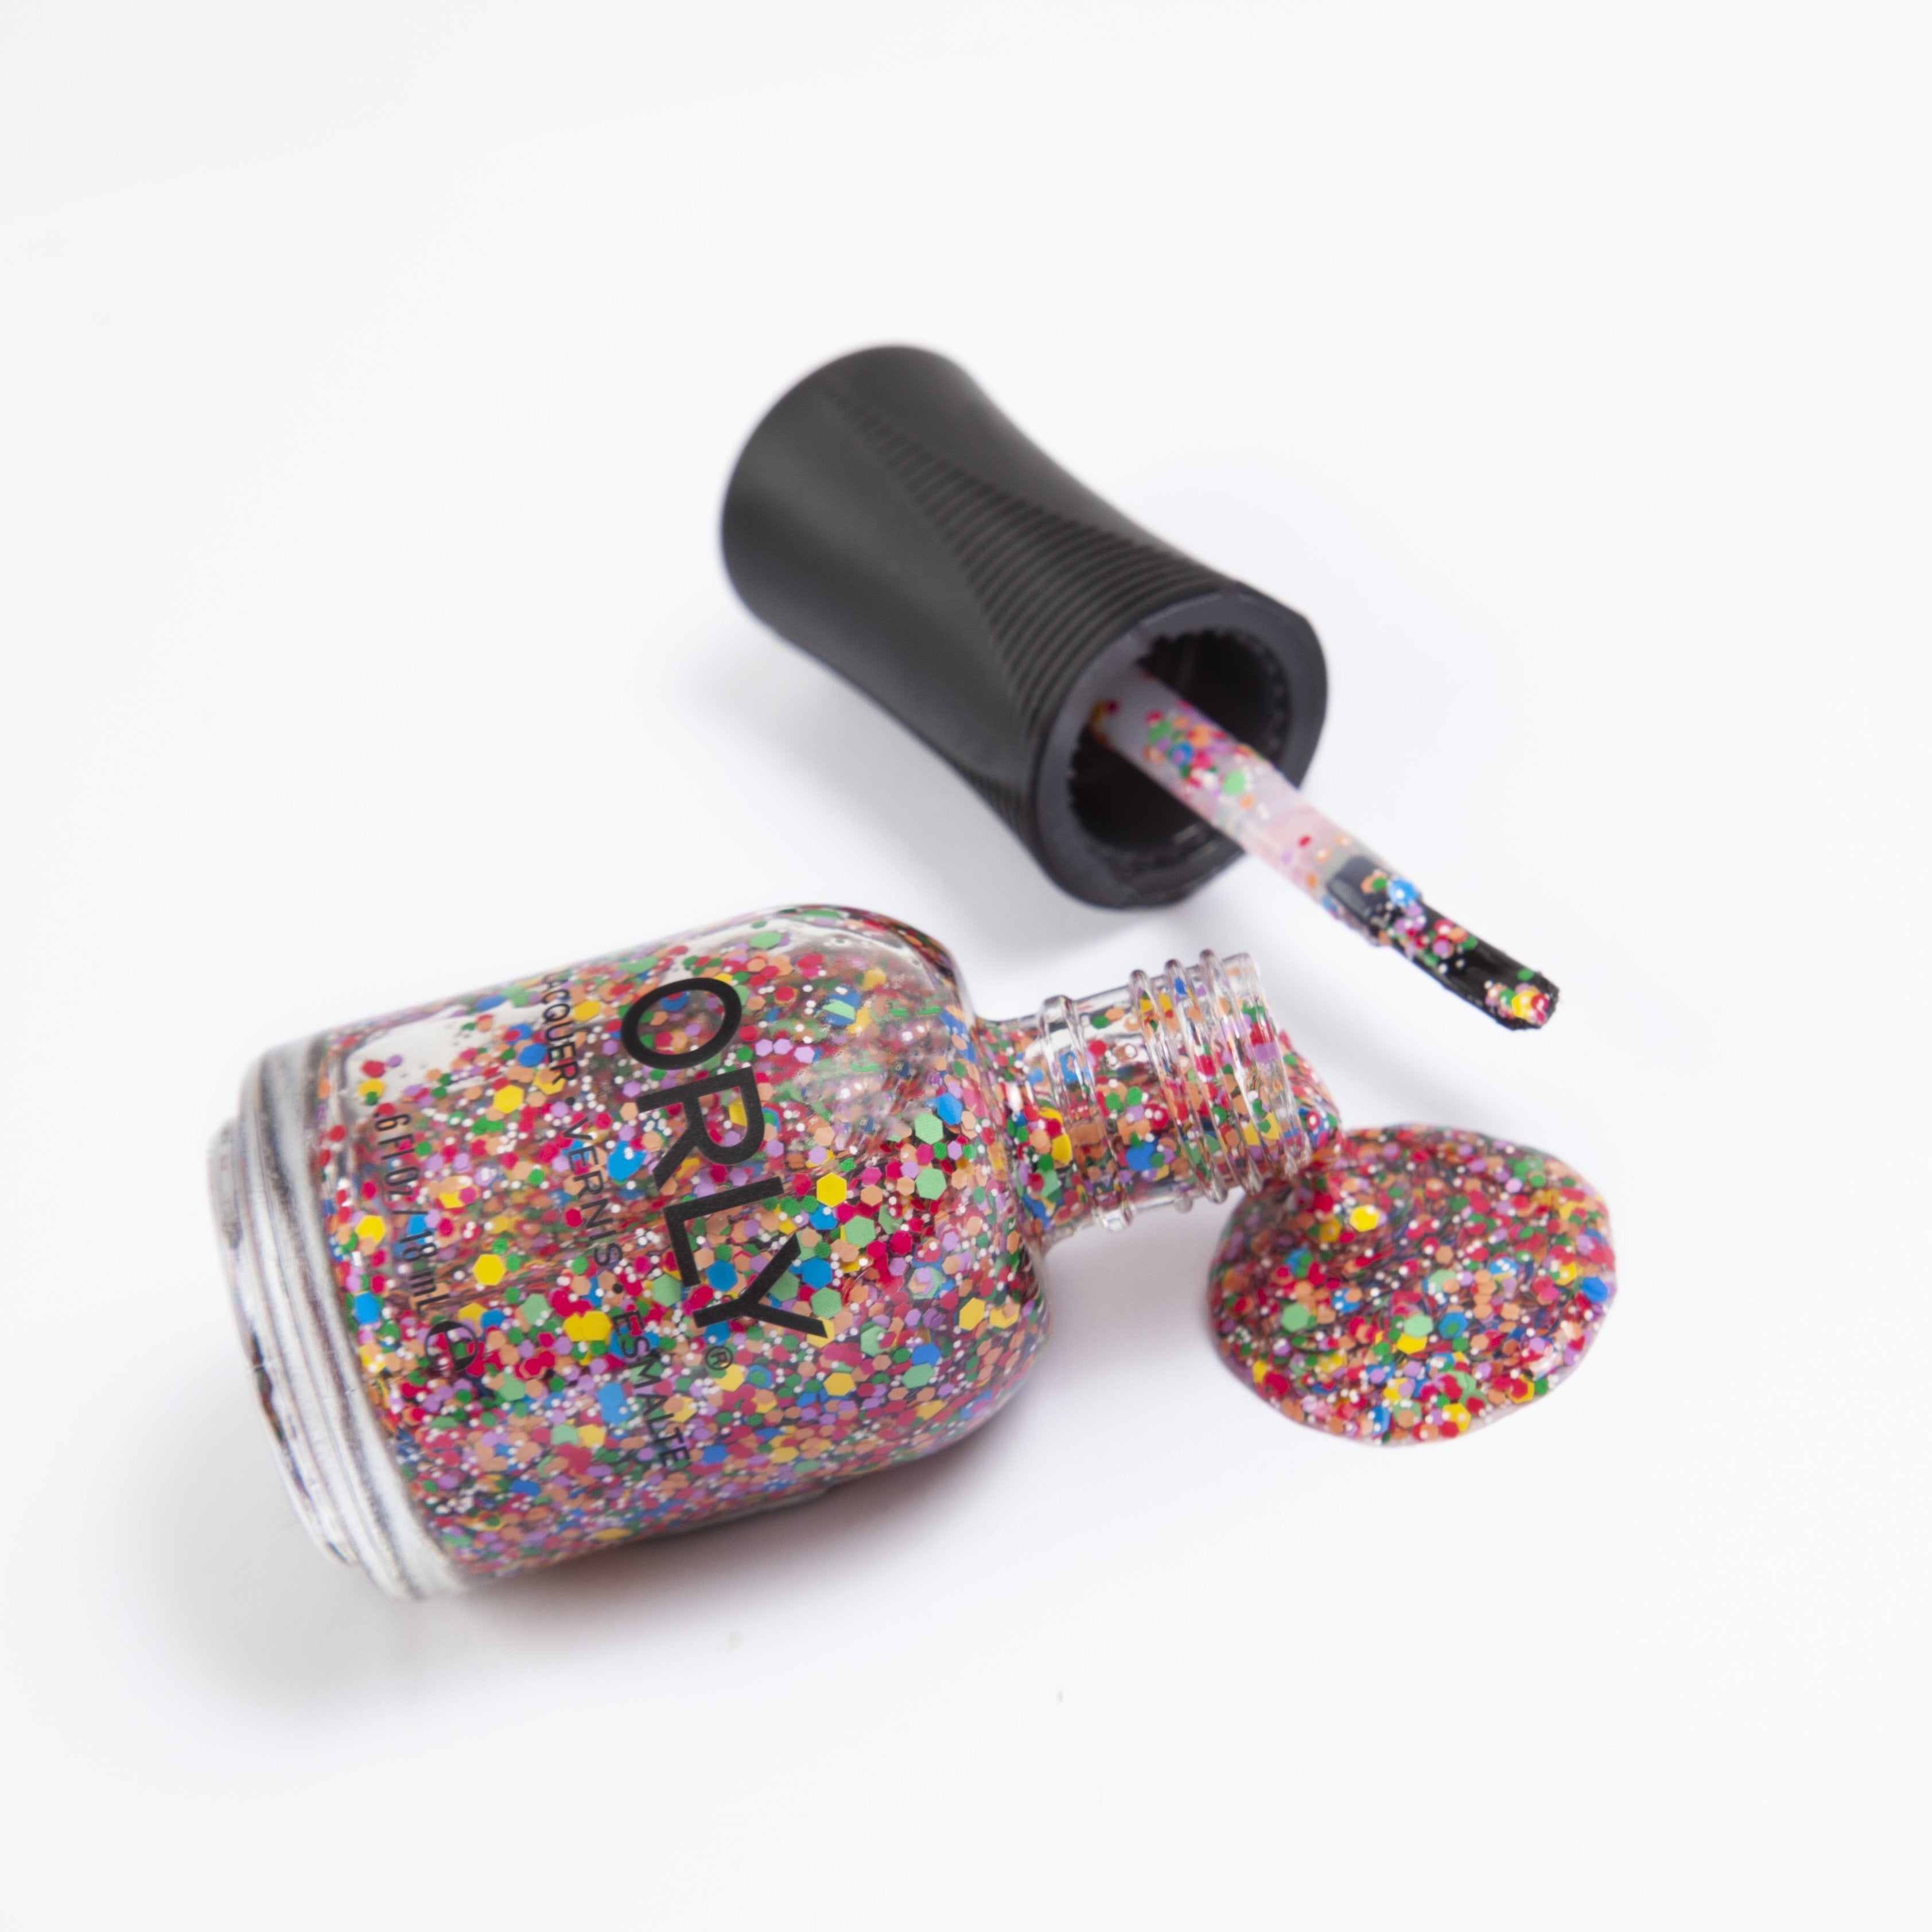 Turn It Up - ORLY Nail Lacquers